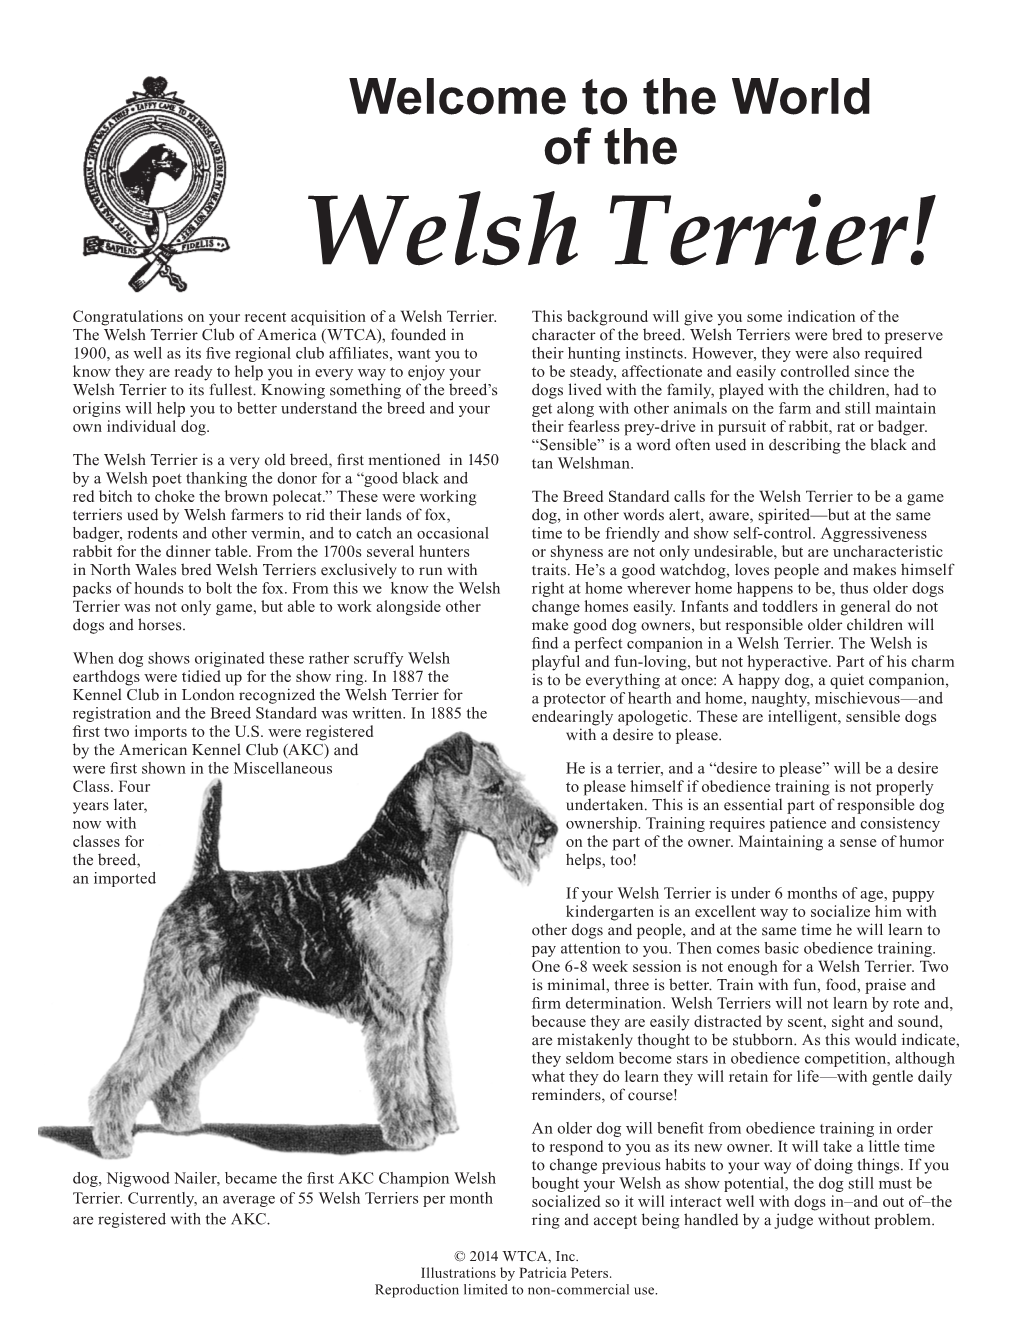 Welsh Terrier! Congratulations on Your Recent Acquisition of a Welsh Terrier